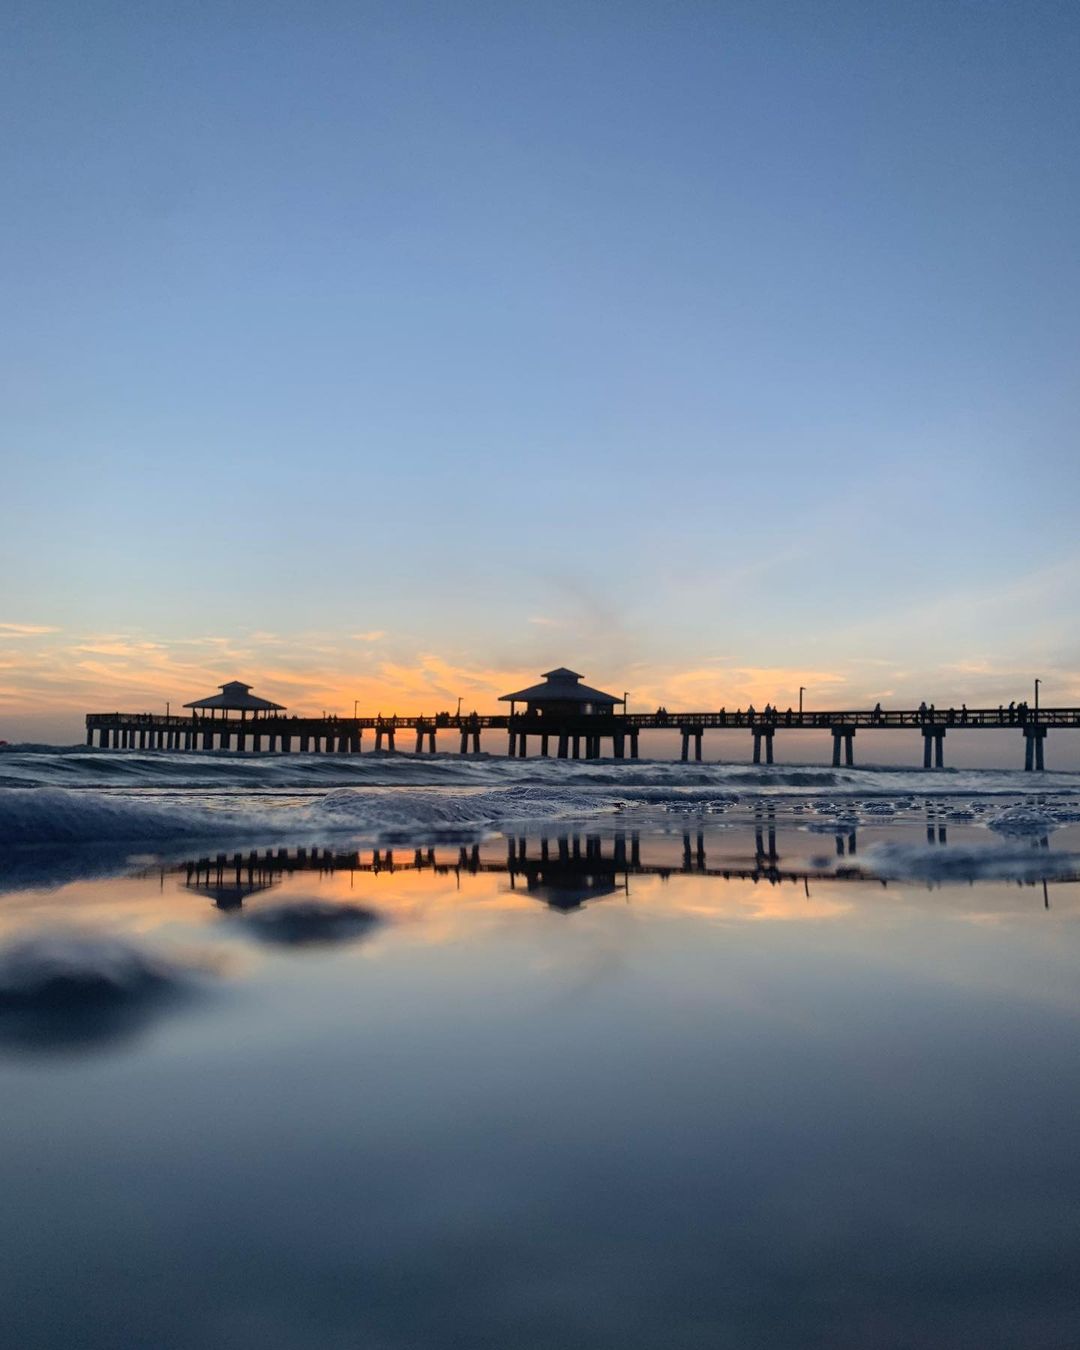 Sunset Photo of the Pier at Fort Myers Beach. Photo by Instagram user @ocana.photography